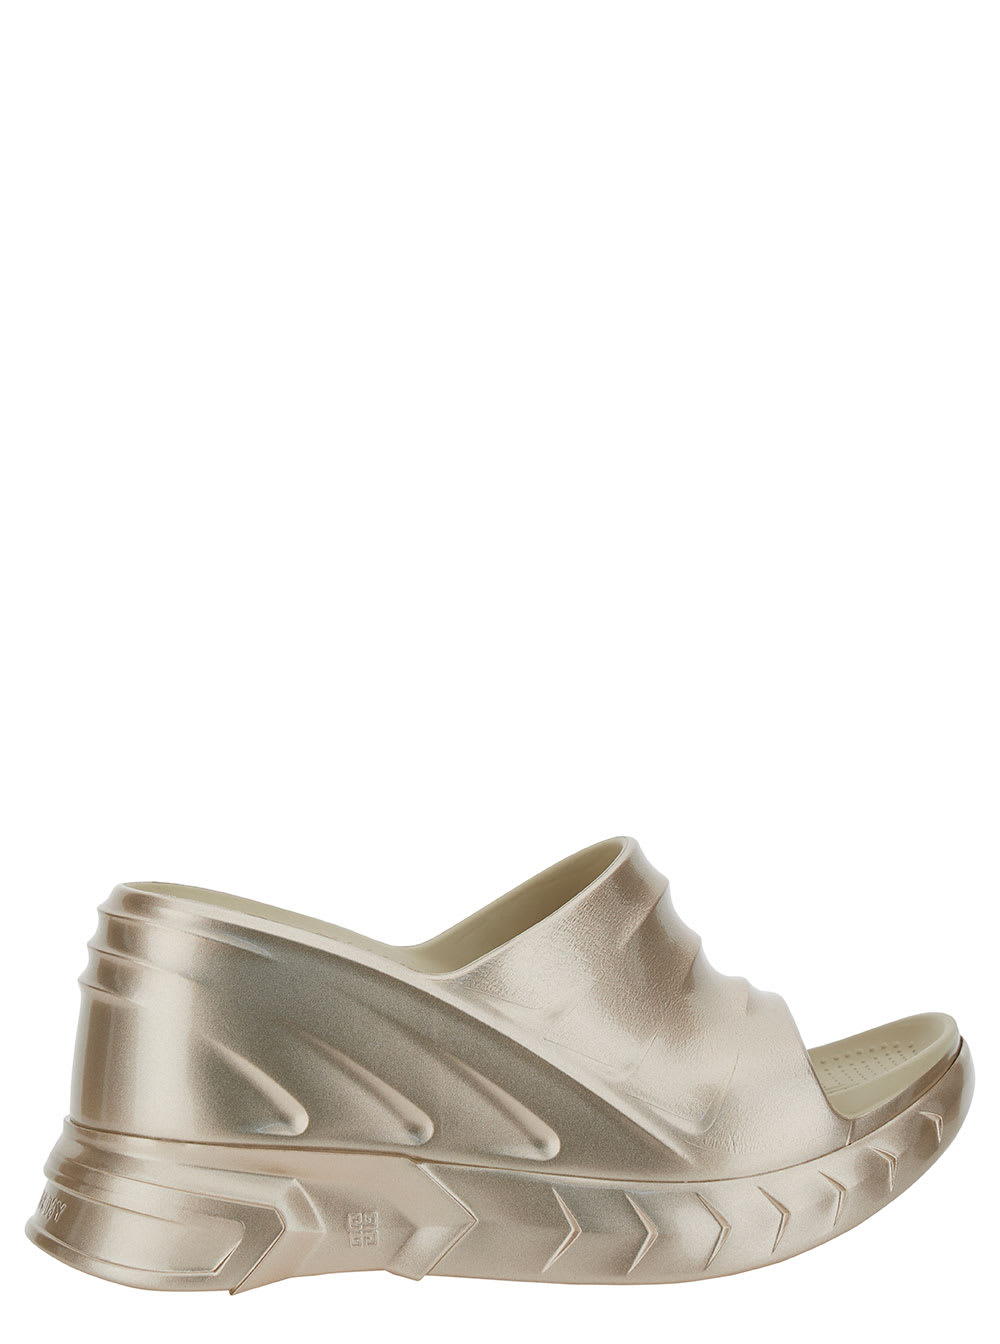 GIVENCHY MARSHMALLOW GOLD-TONED WEDGE SANDALS WITH 4G LOGO IN LAMINATED RUBBER WOMAN